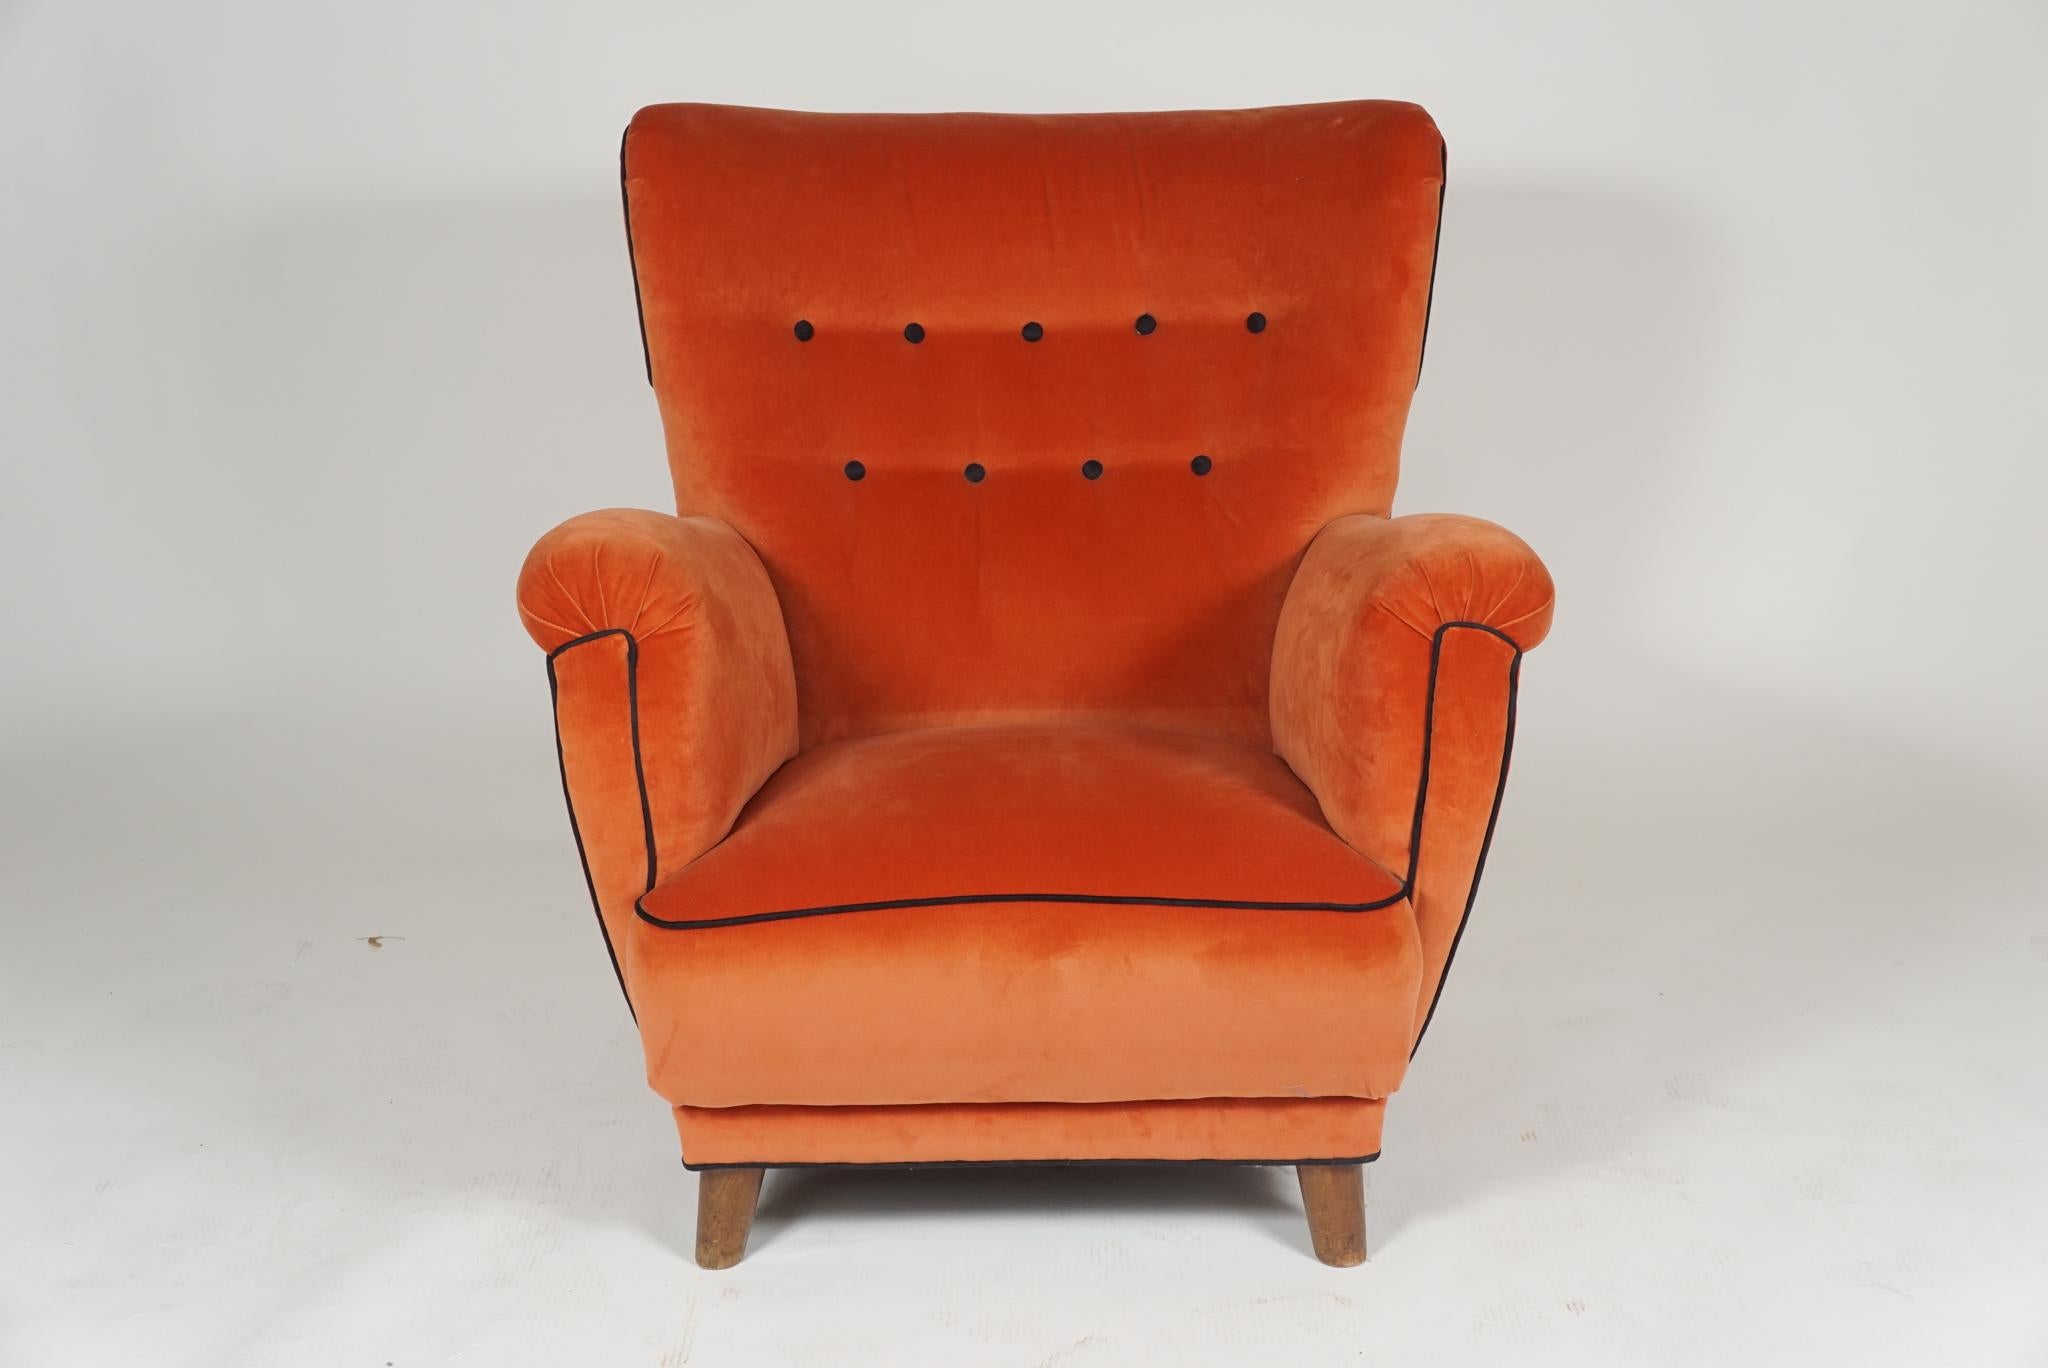 Danish 1940s large-scale club chair upholstered in orange velvet with black trim and button accents. Really comfortable.
 